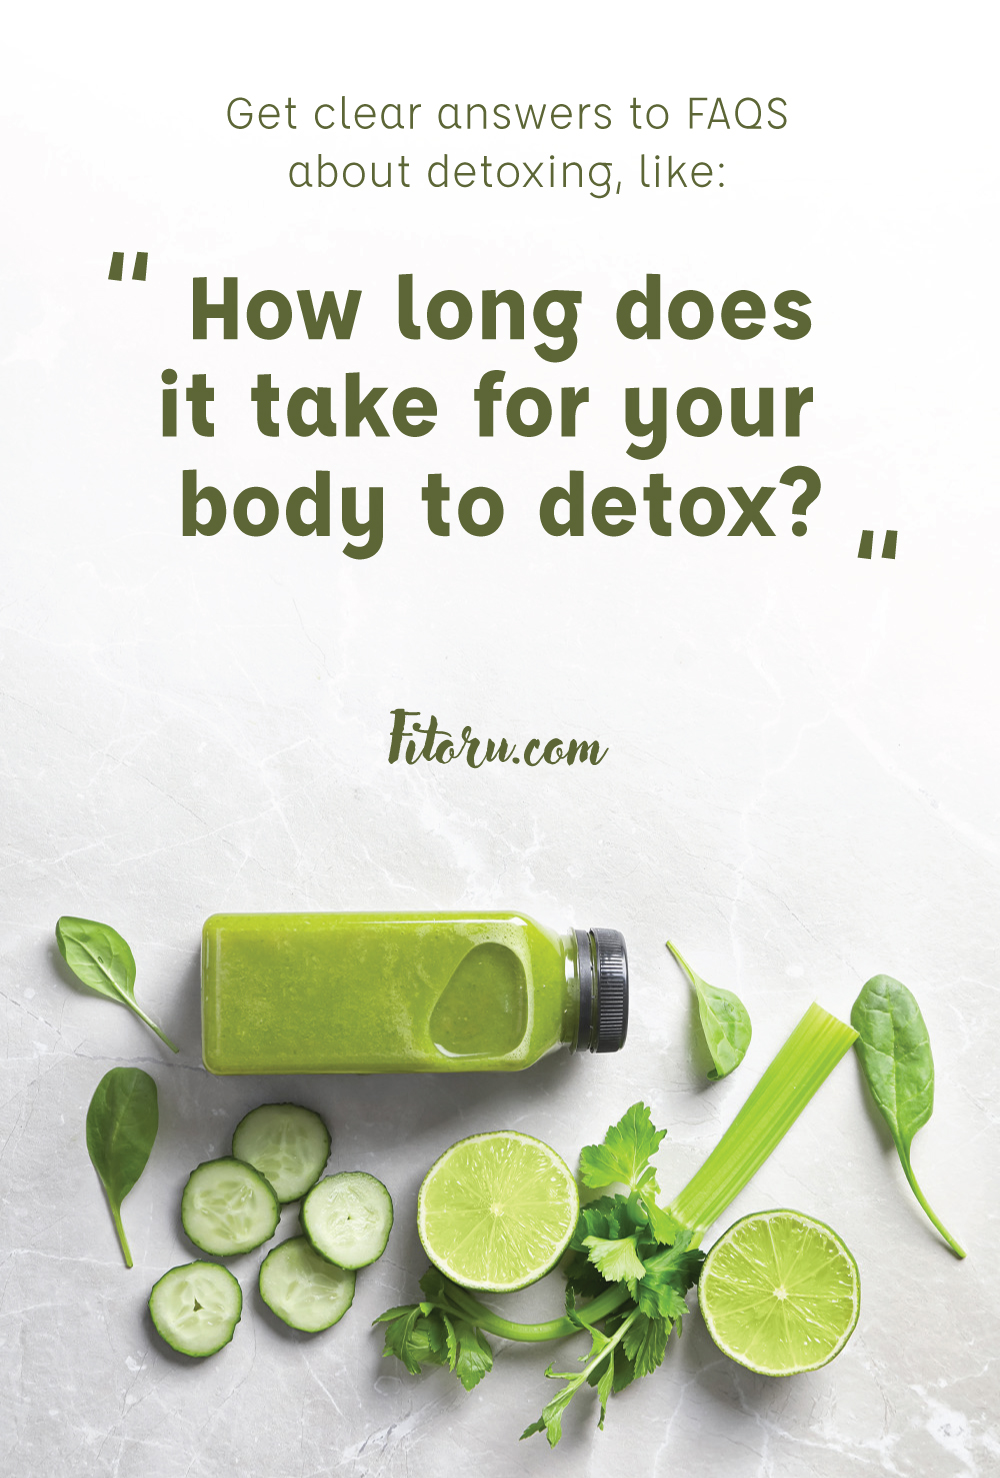 Get answers to 5 FAQs about detoxing.